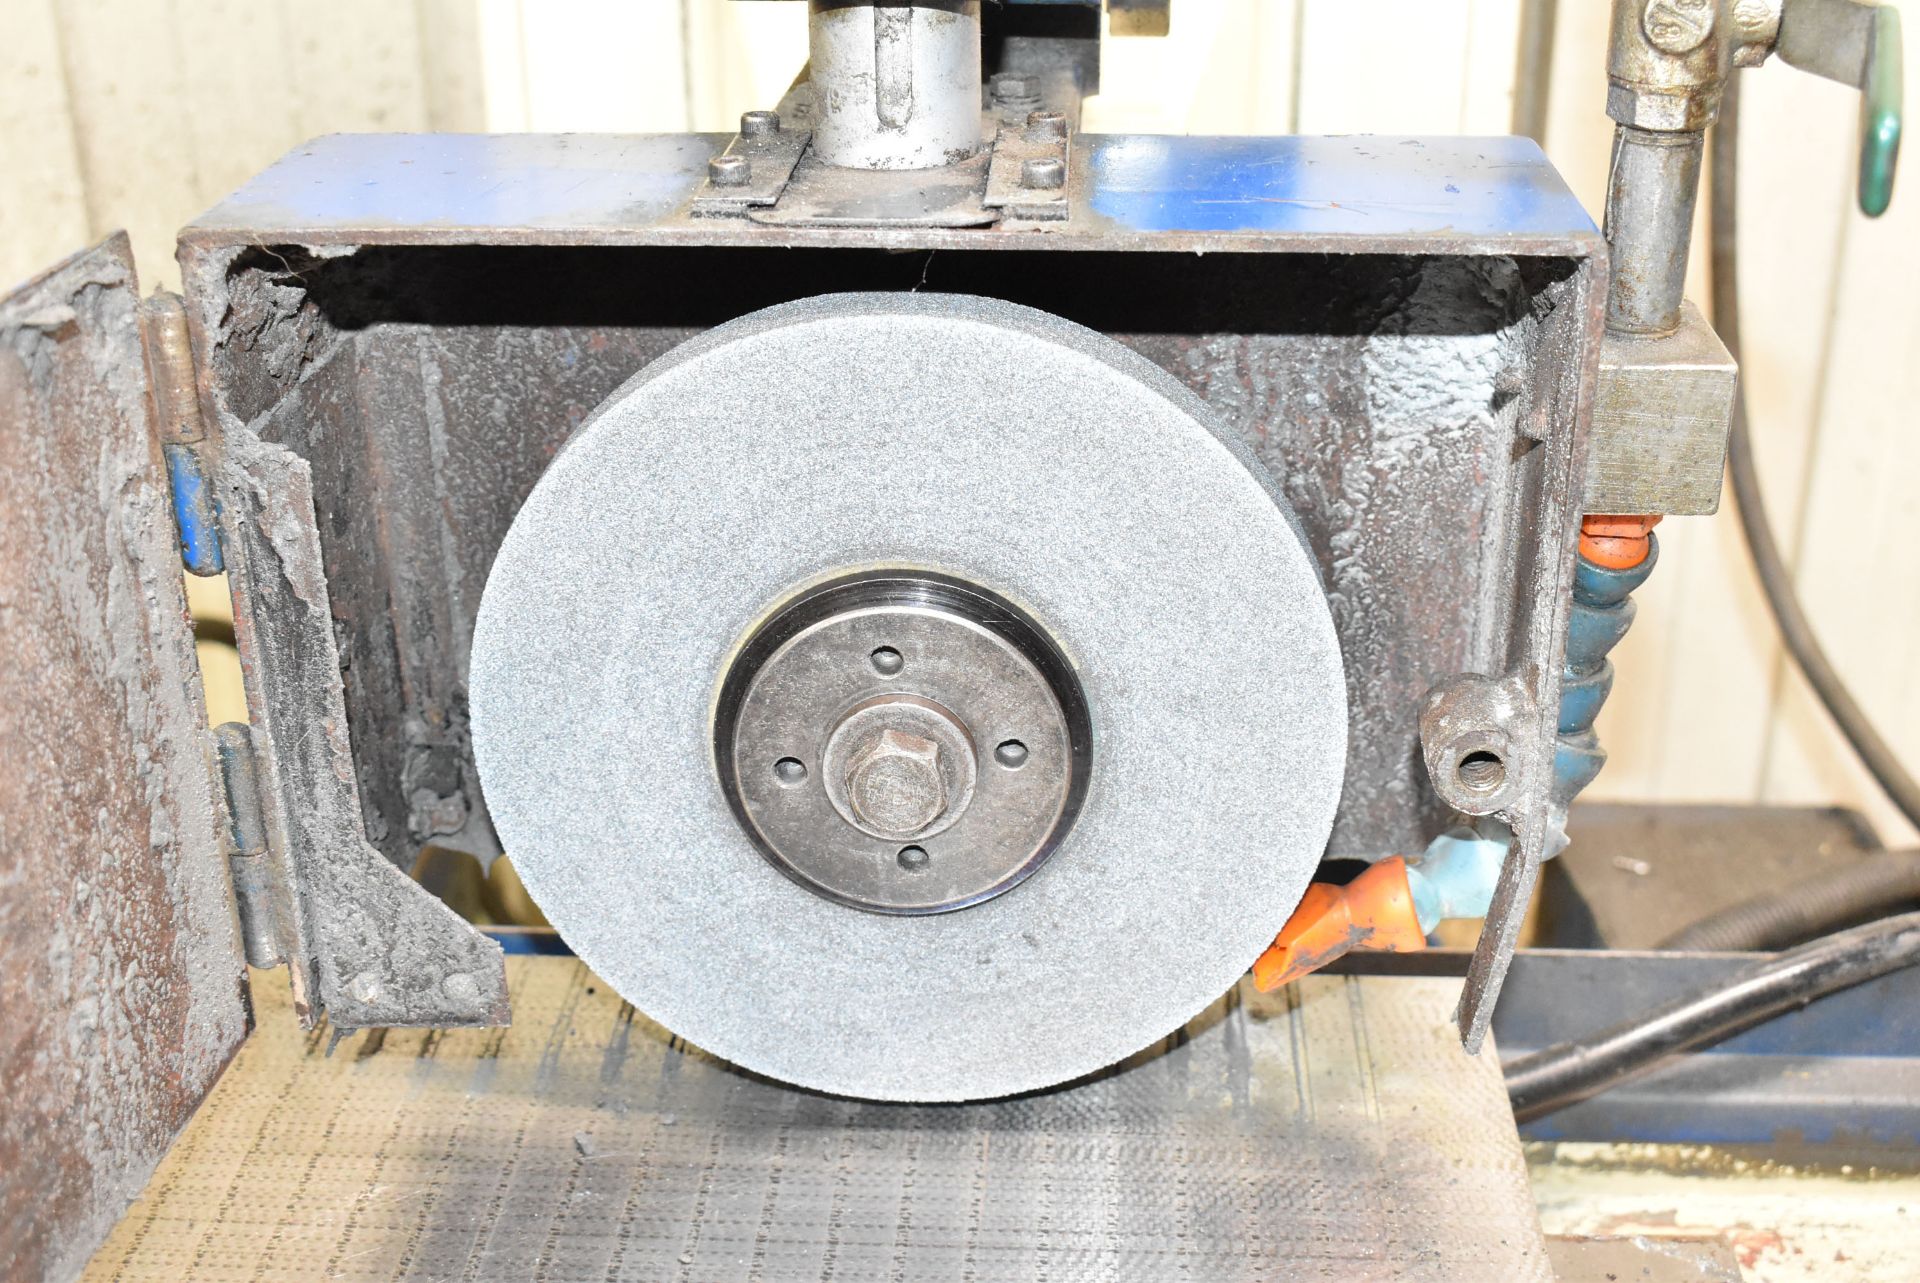 CLAUSING CSG-1020ASD HYDRAULIC SURFACE GRINDER WITH 10" X 20" MAGNETIC CHUCK, 840 LB MAXIMUM TABLE - Image 5 of 8